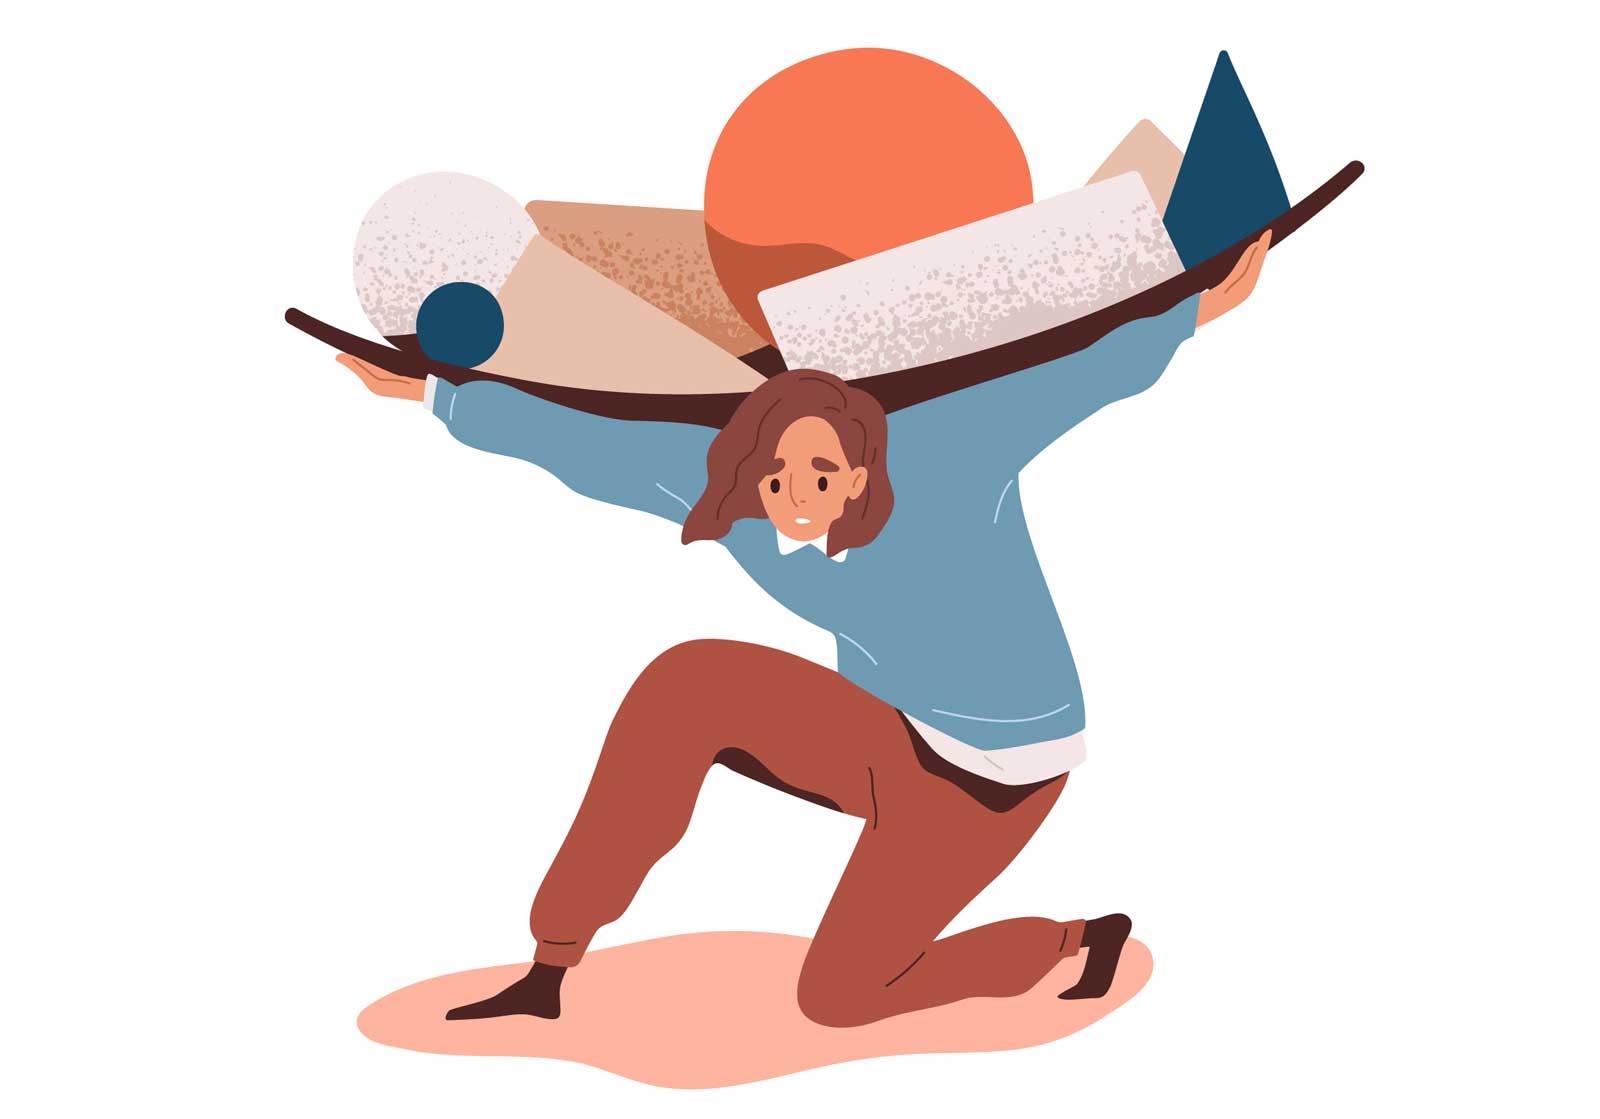 An illustration of a girl collapsing under a heavy load of abstract shapes. The circle looks particularly weighty.